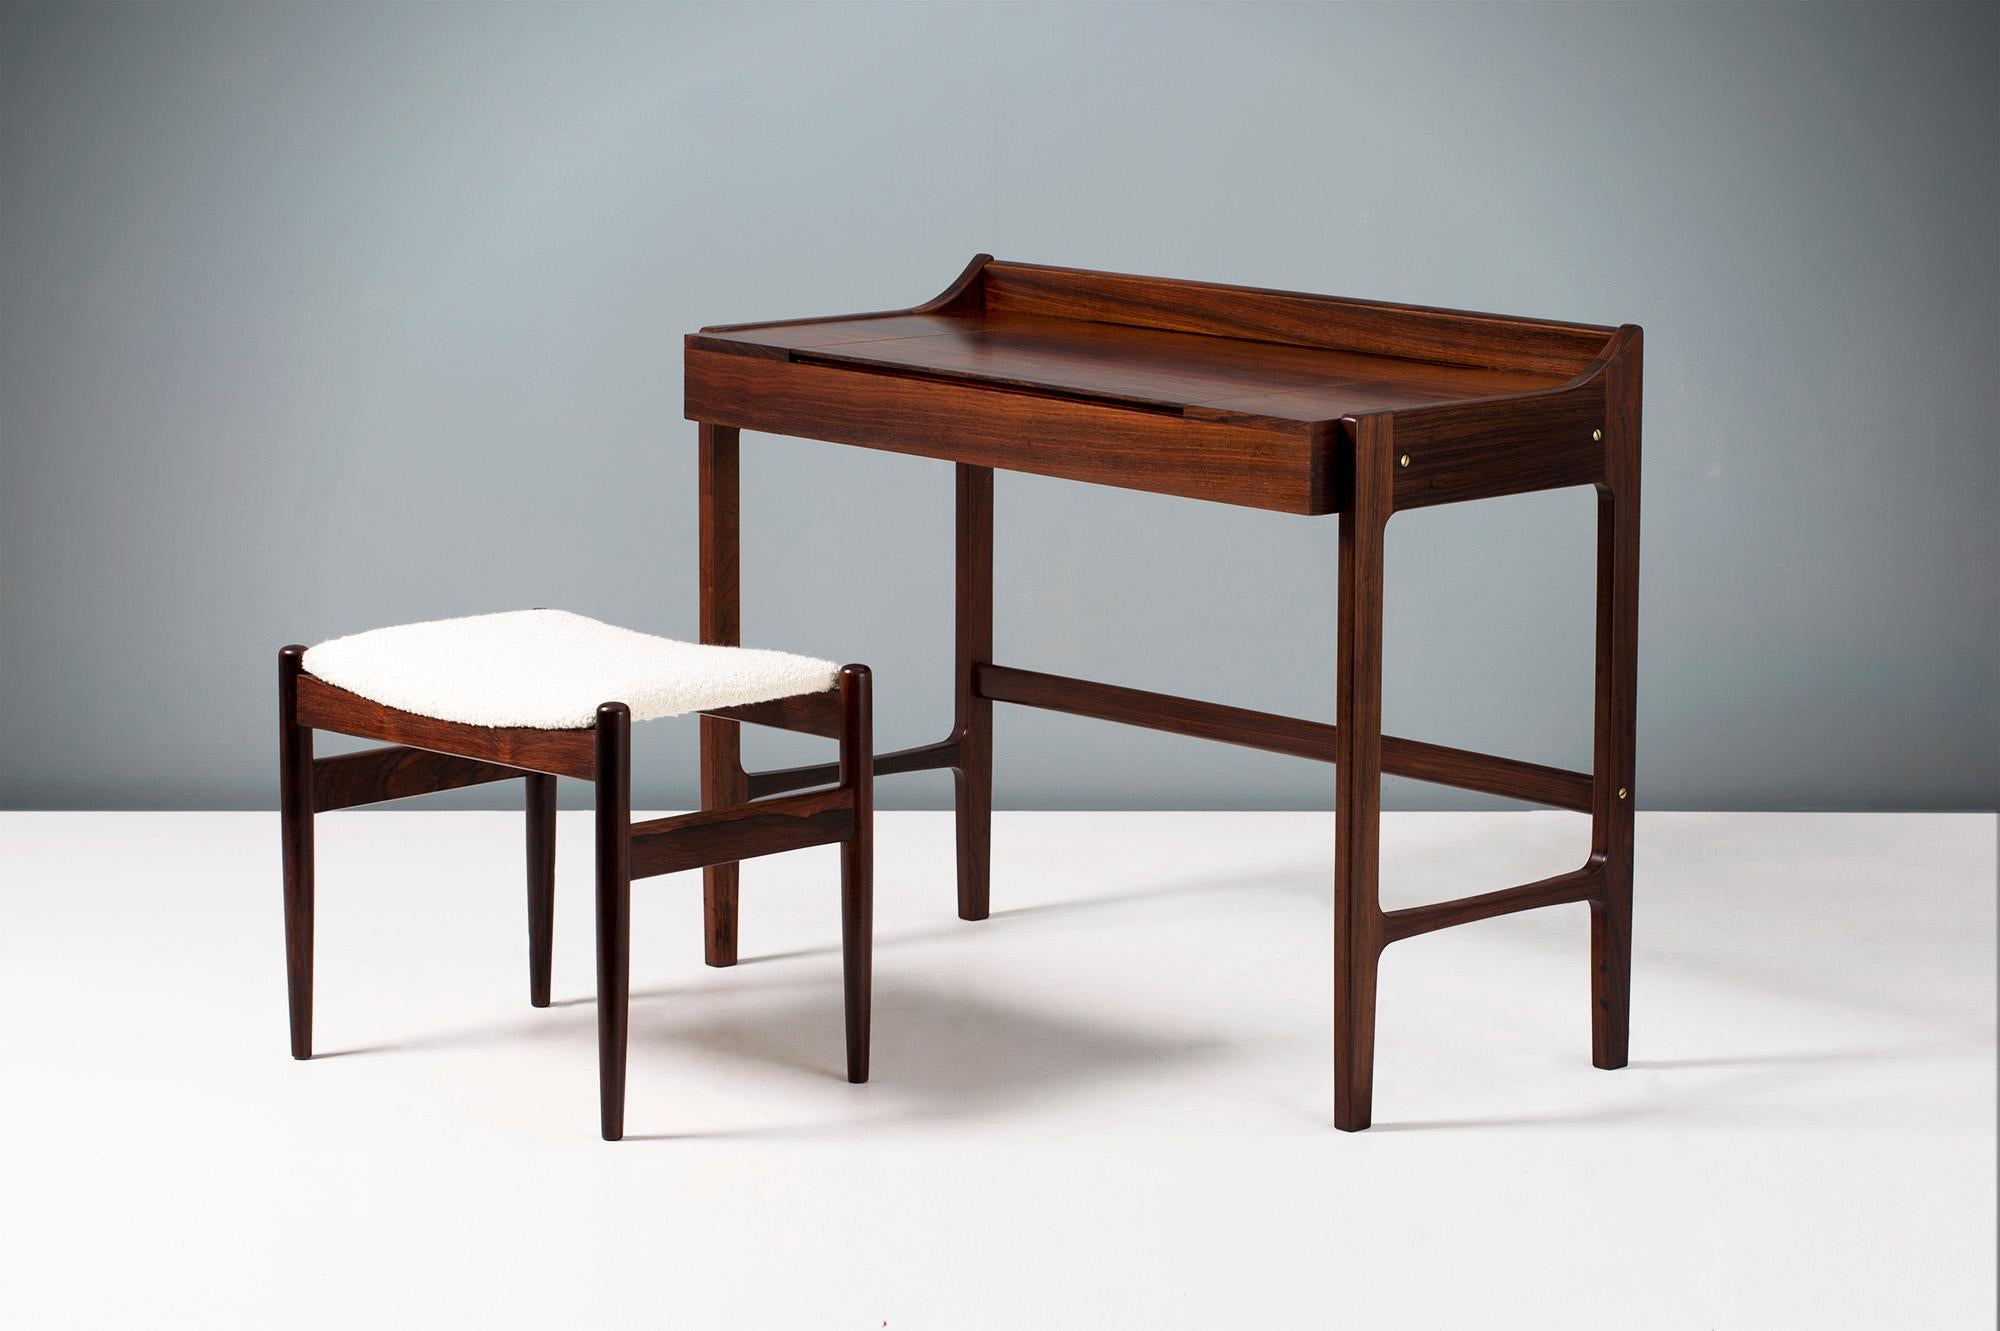 Danish Cabinetmaker

Dressing table, circa 1960

Dressing table made from highly figured exotic rosewood with fold-down mirror on brass fittings. Matching rosewood stool reupholstered in boucle wool fabric.

Measures: H 77cm, D 50cm, W 55cm,